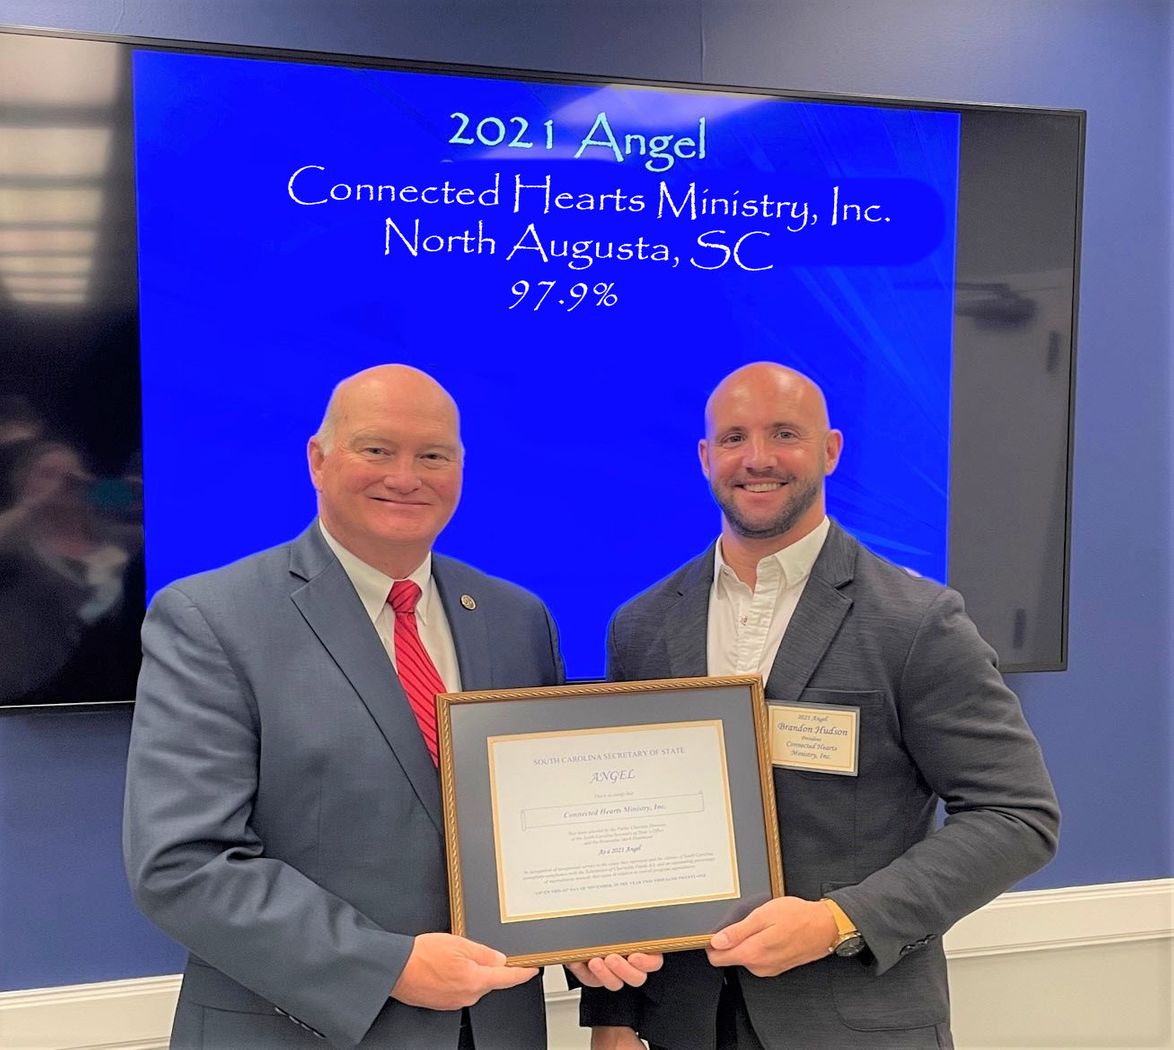 Secretary Hammond with Connected Hearts Ministry, Inc.